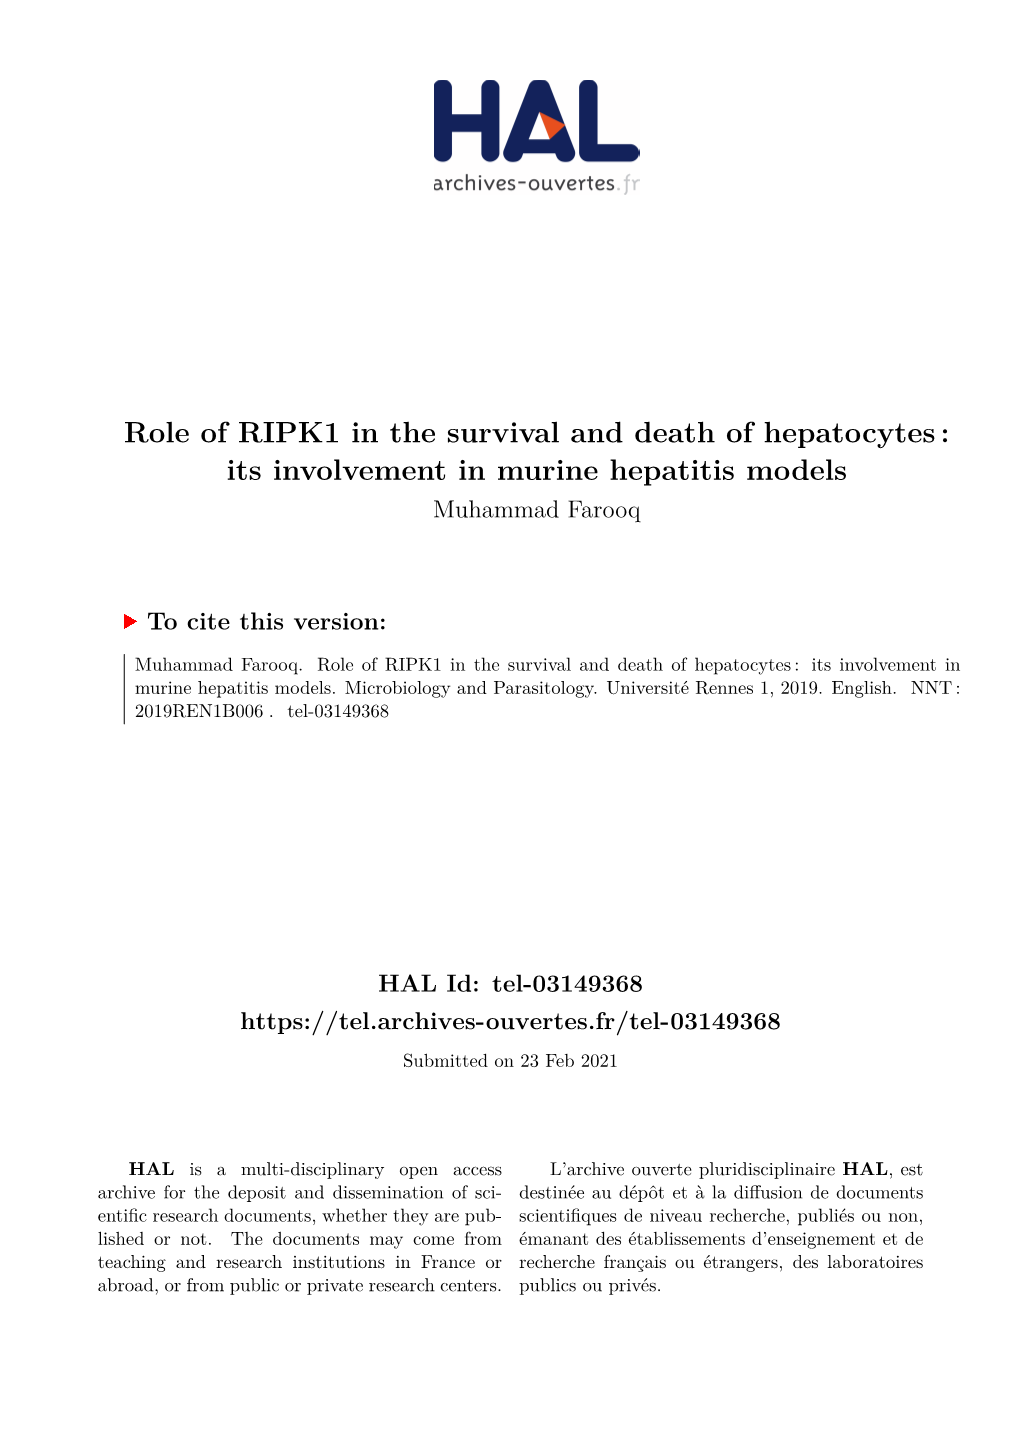 Role of RIPK1 in the Survival and Death of Hepatocytes : Its Involvement in Murine Hepatitis Models Muhammad Farooq